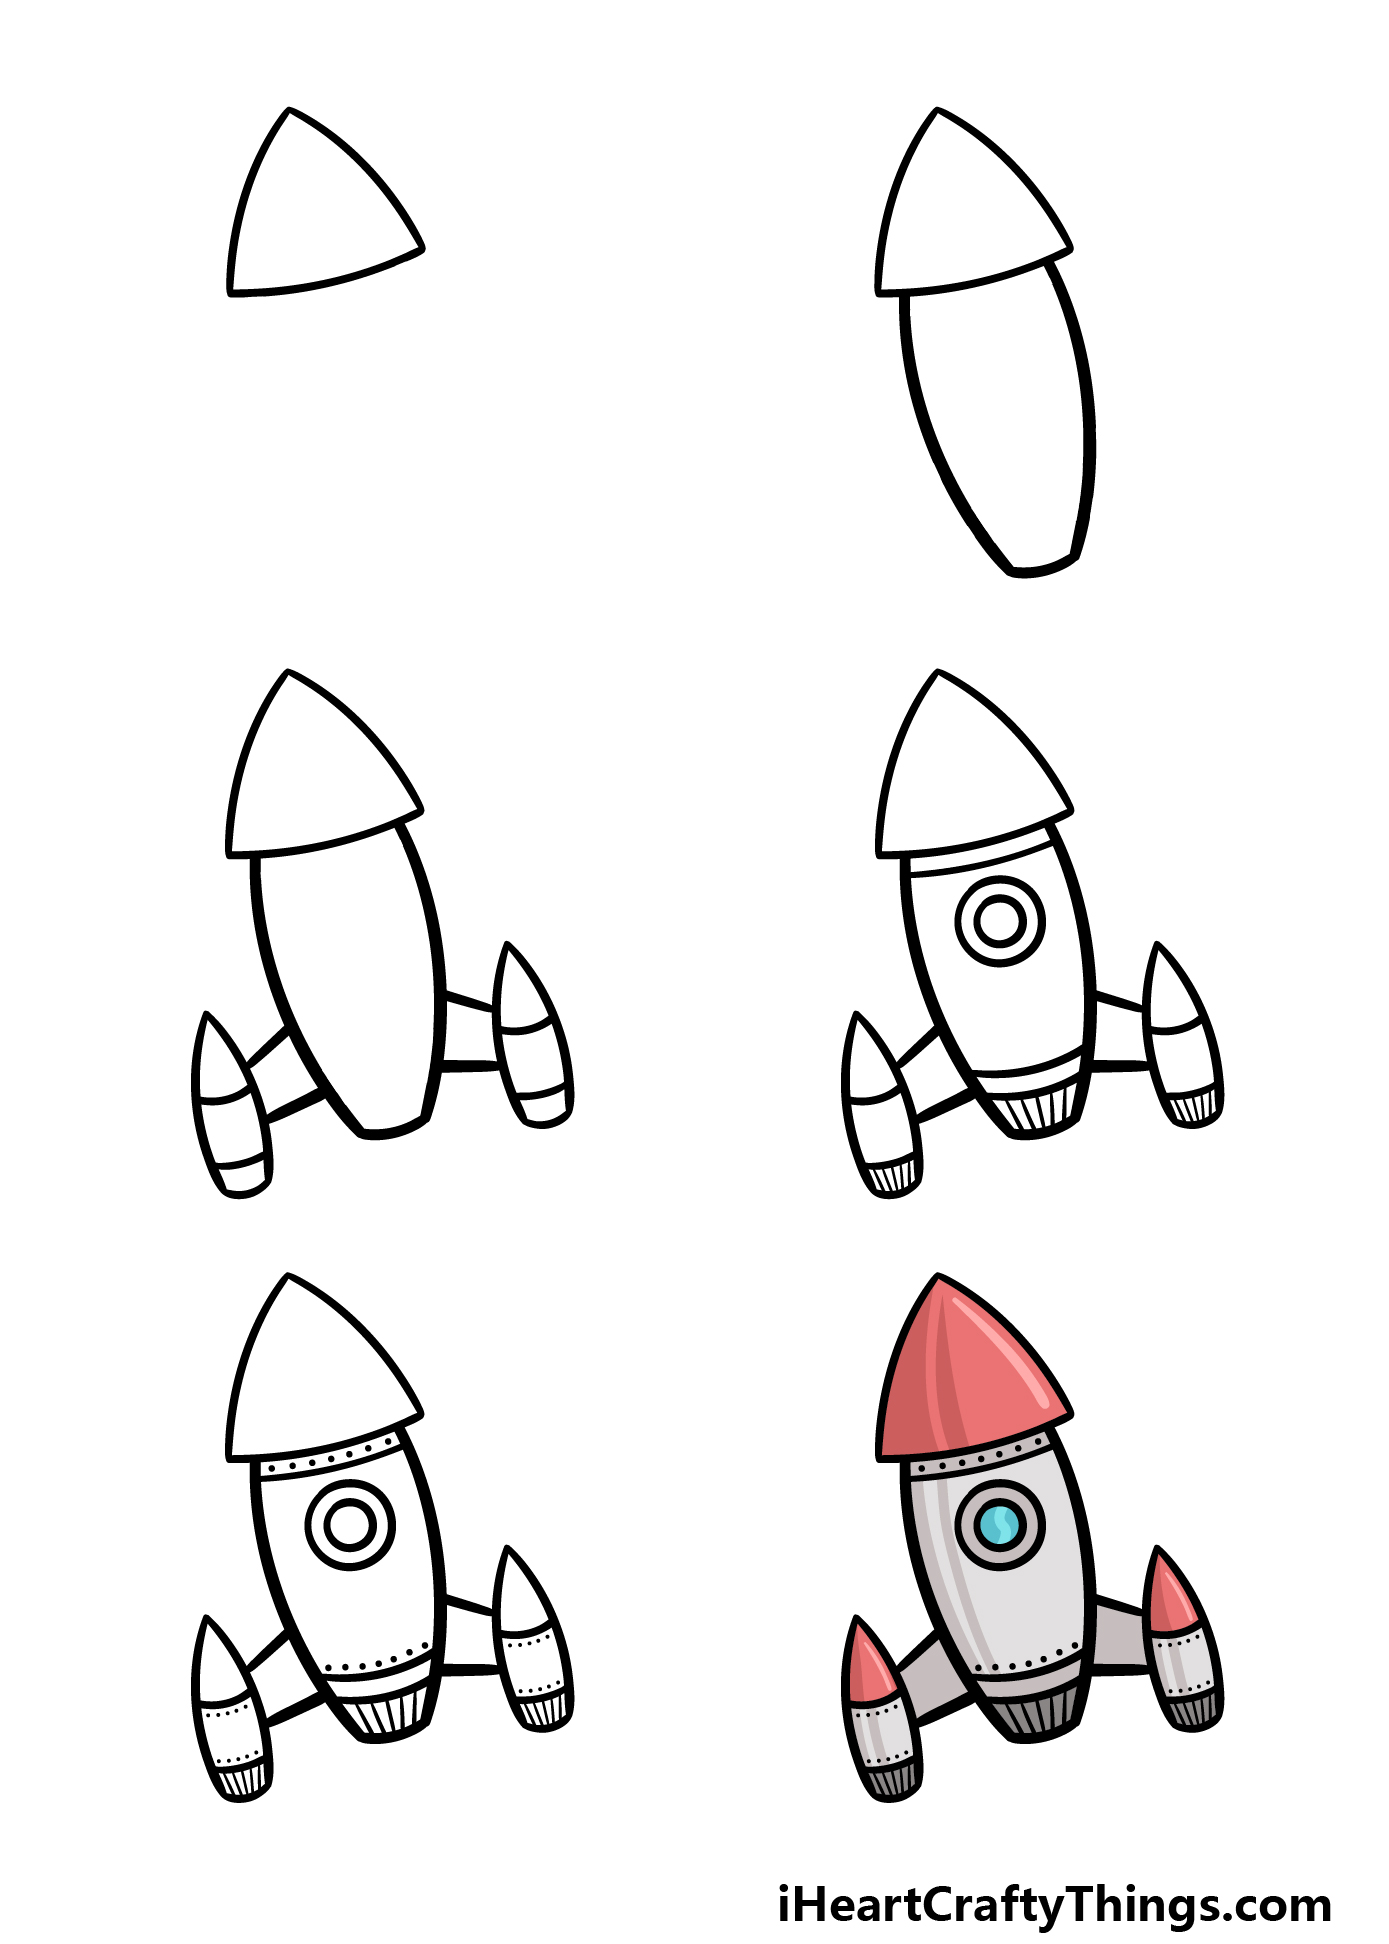 how to draw a cartoon rocket in 6 steps